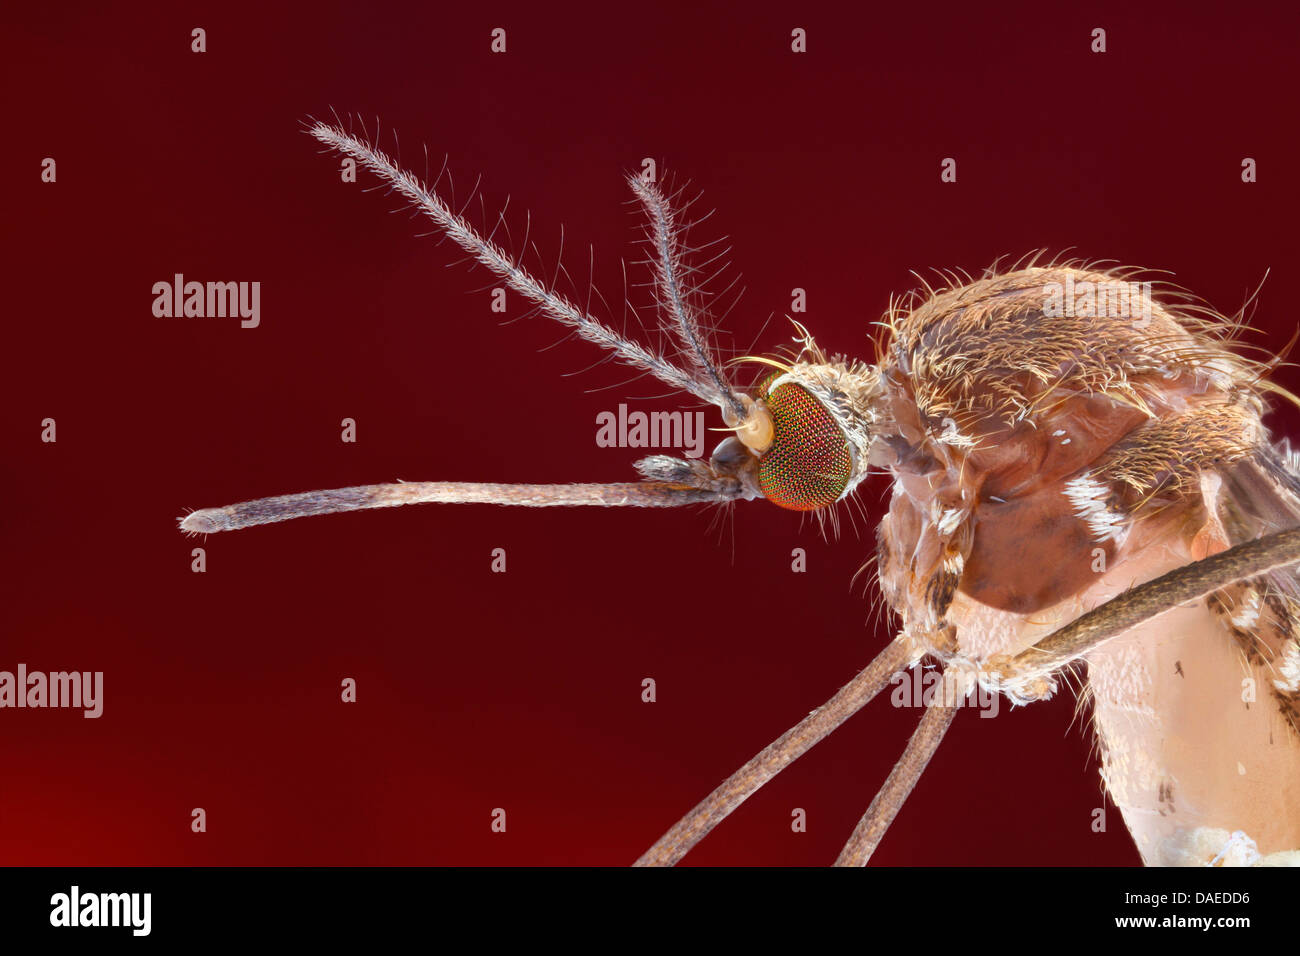 house mosquito, northern common house mosquito, common gnat, house gnat (Culex pipiens), lateral view of the head with proboscis, Germany Stock Photo